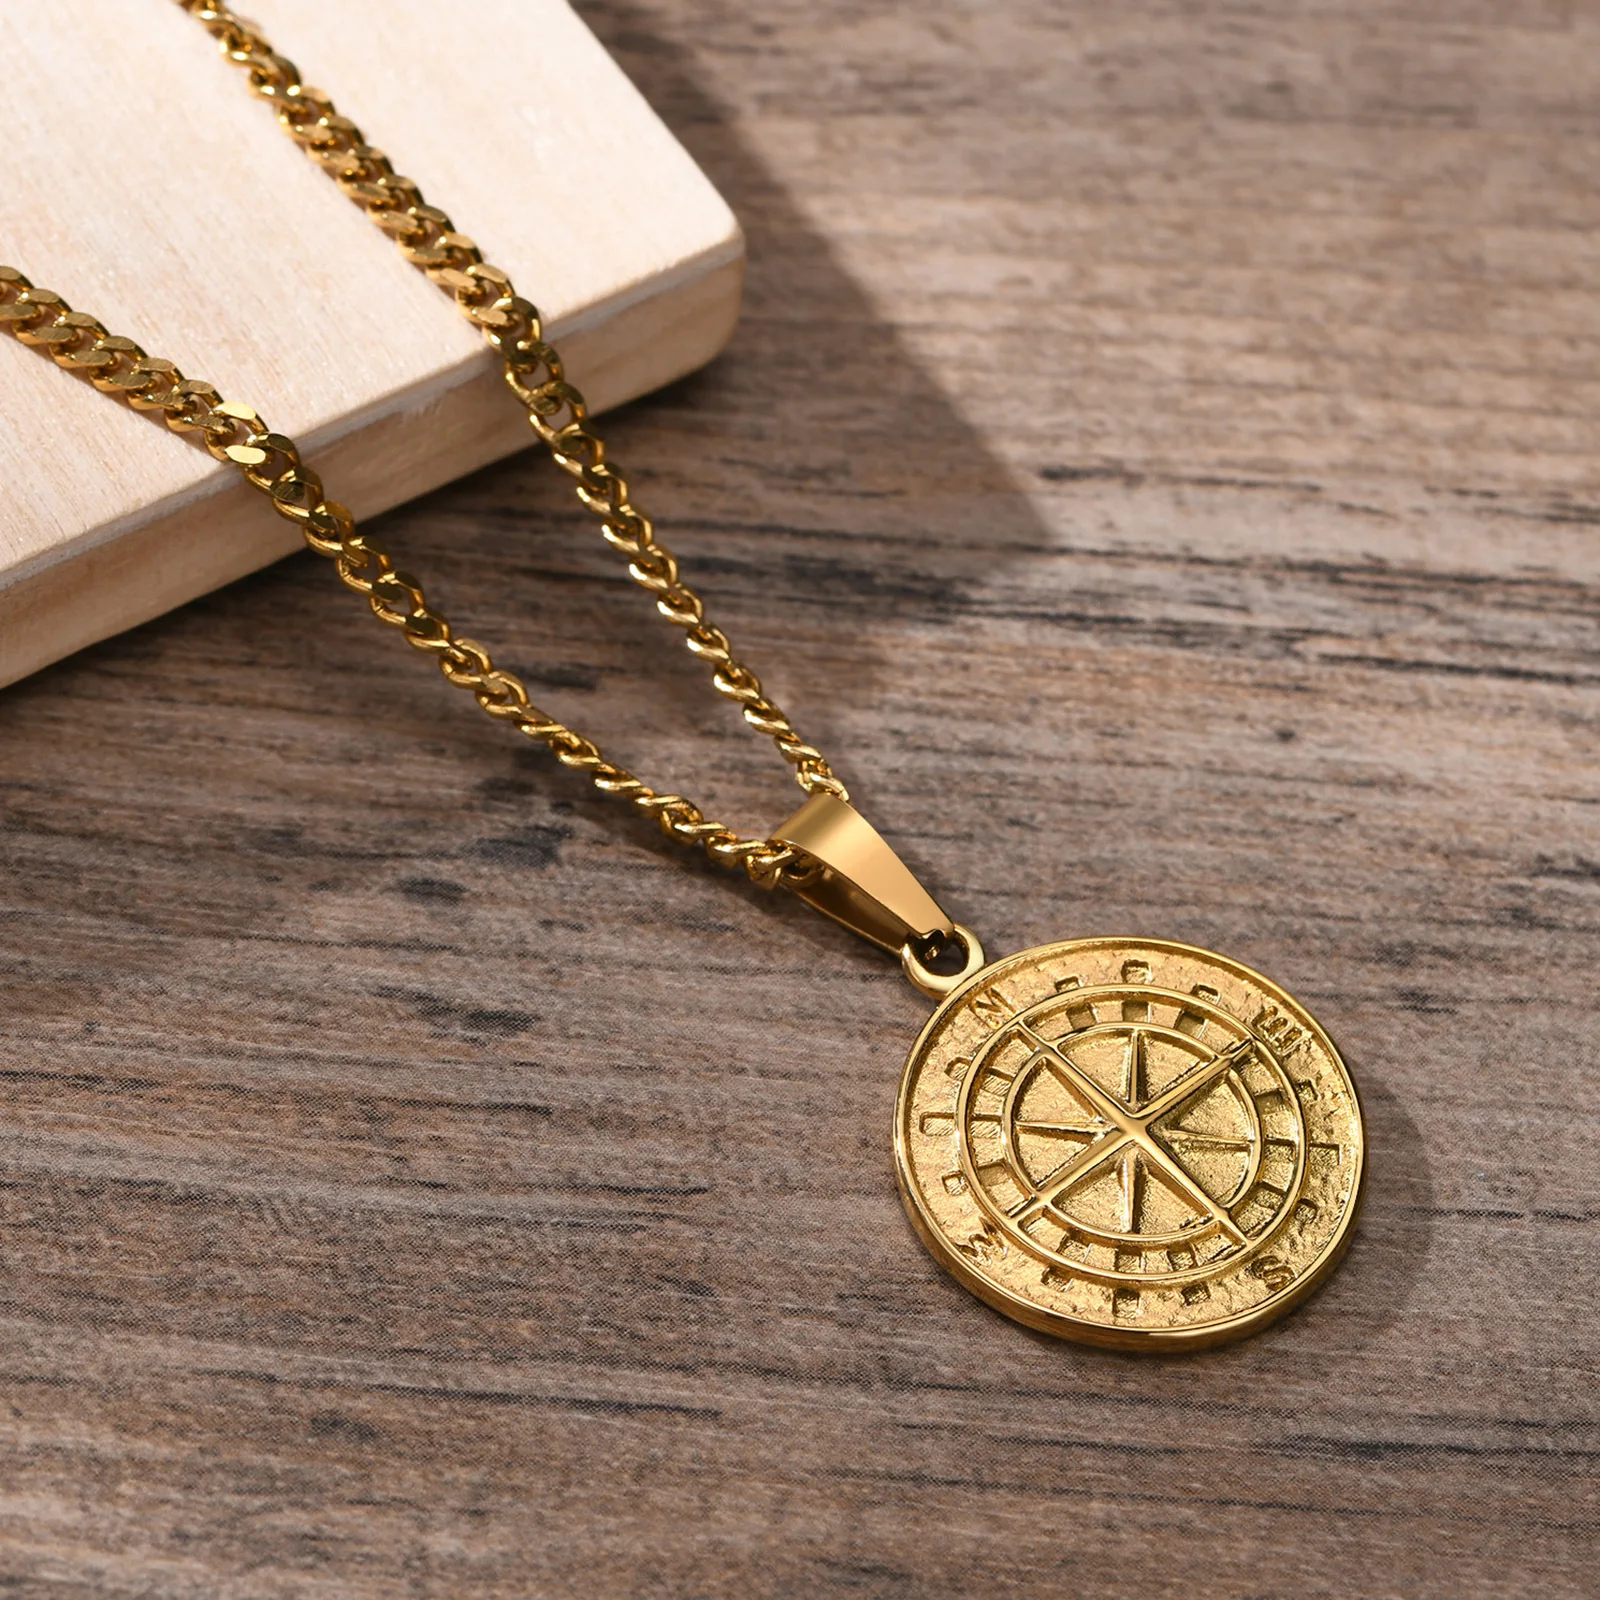 Travel Compass Pendant Necklaces for Men Simple Round Gold Color Stainless Steel Chain Hip Hop Jewelry Male Gifts Wholesale